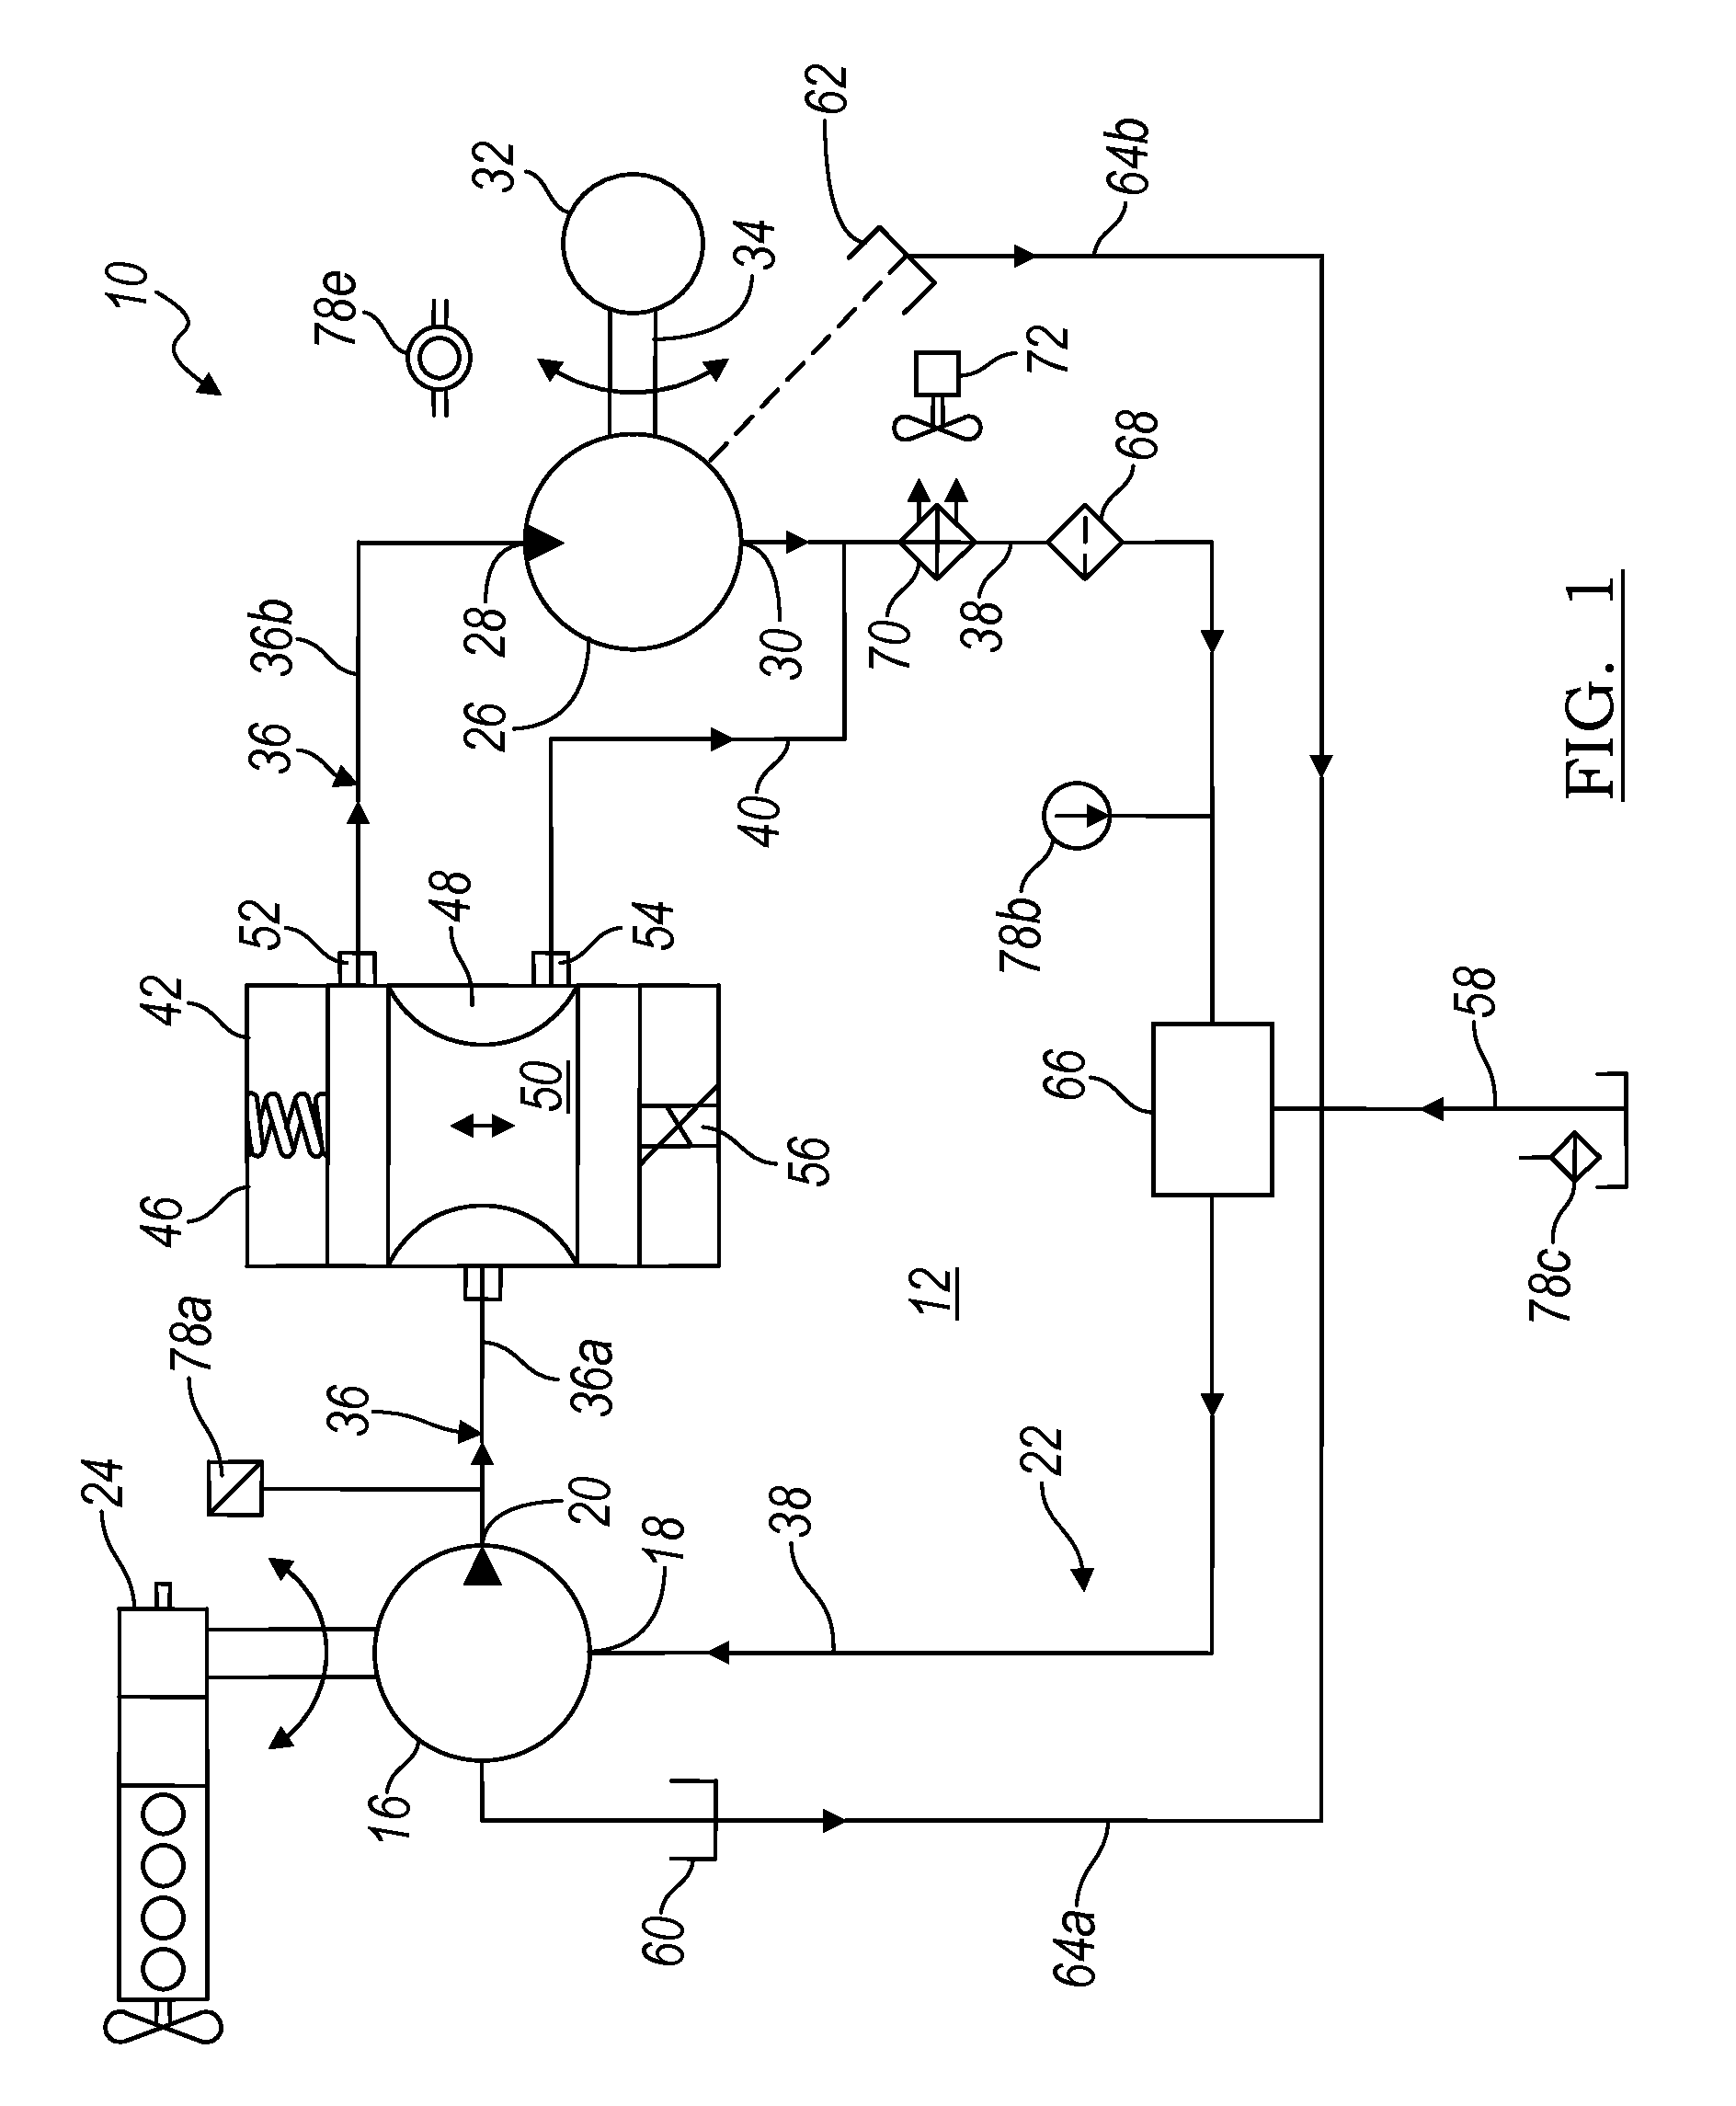 Electronic control for a hydraulically driven generator